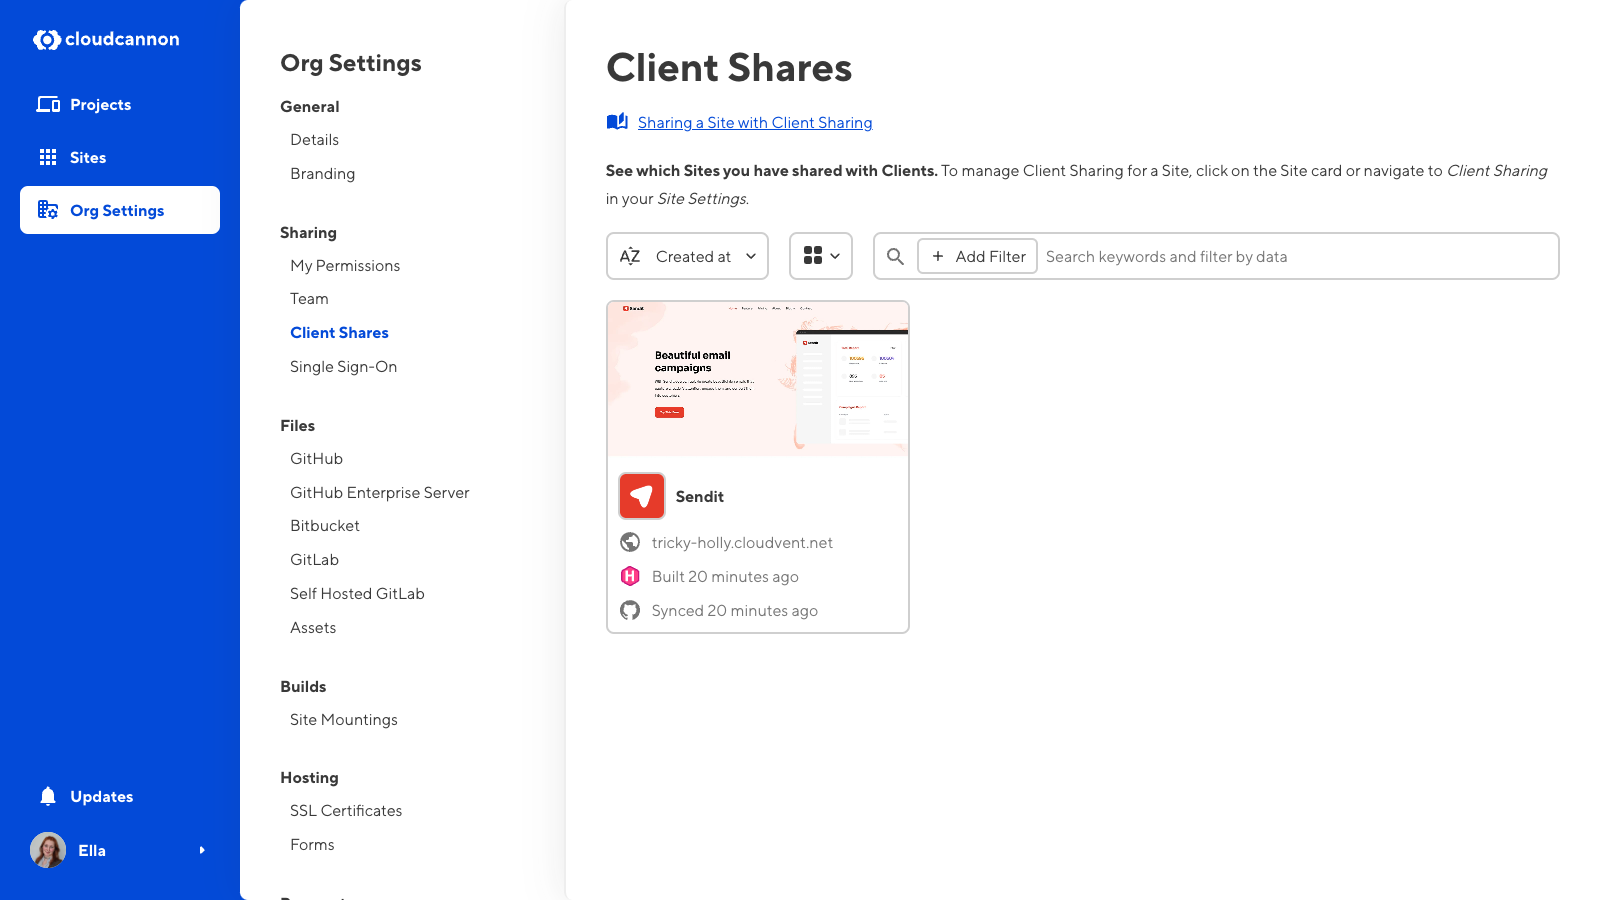 A screenshot of the Client Shares pages shows one Site with Client Sharing enabled.